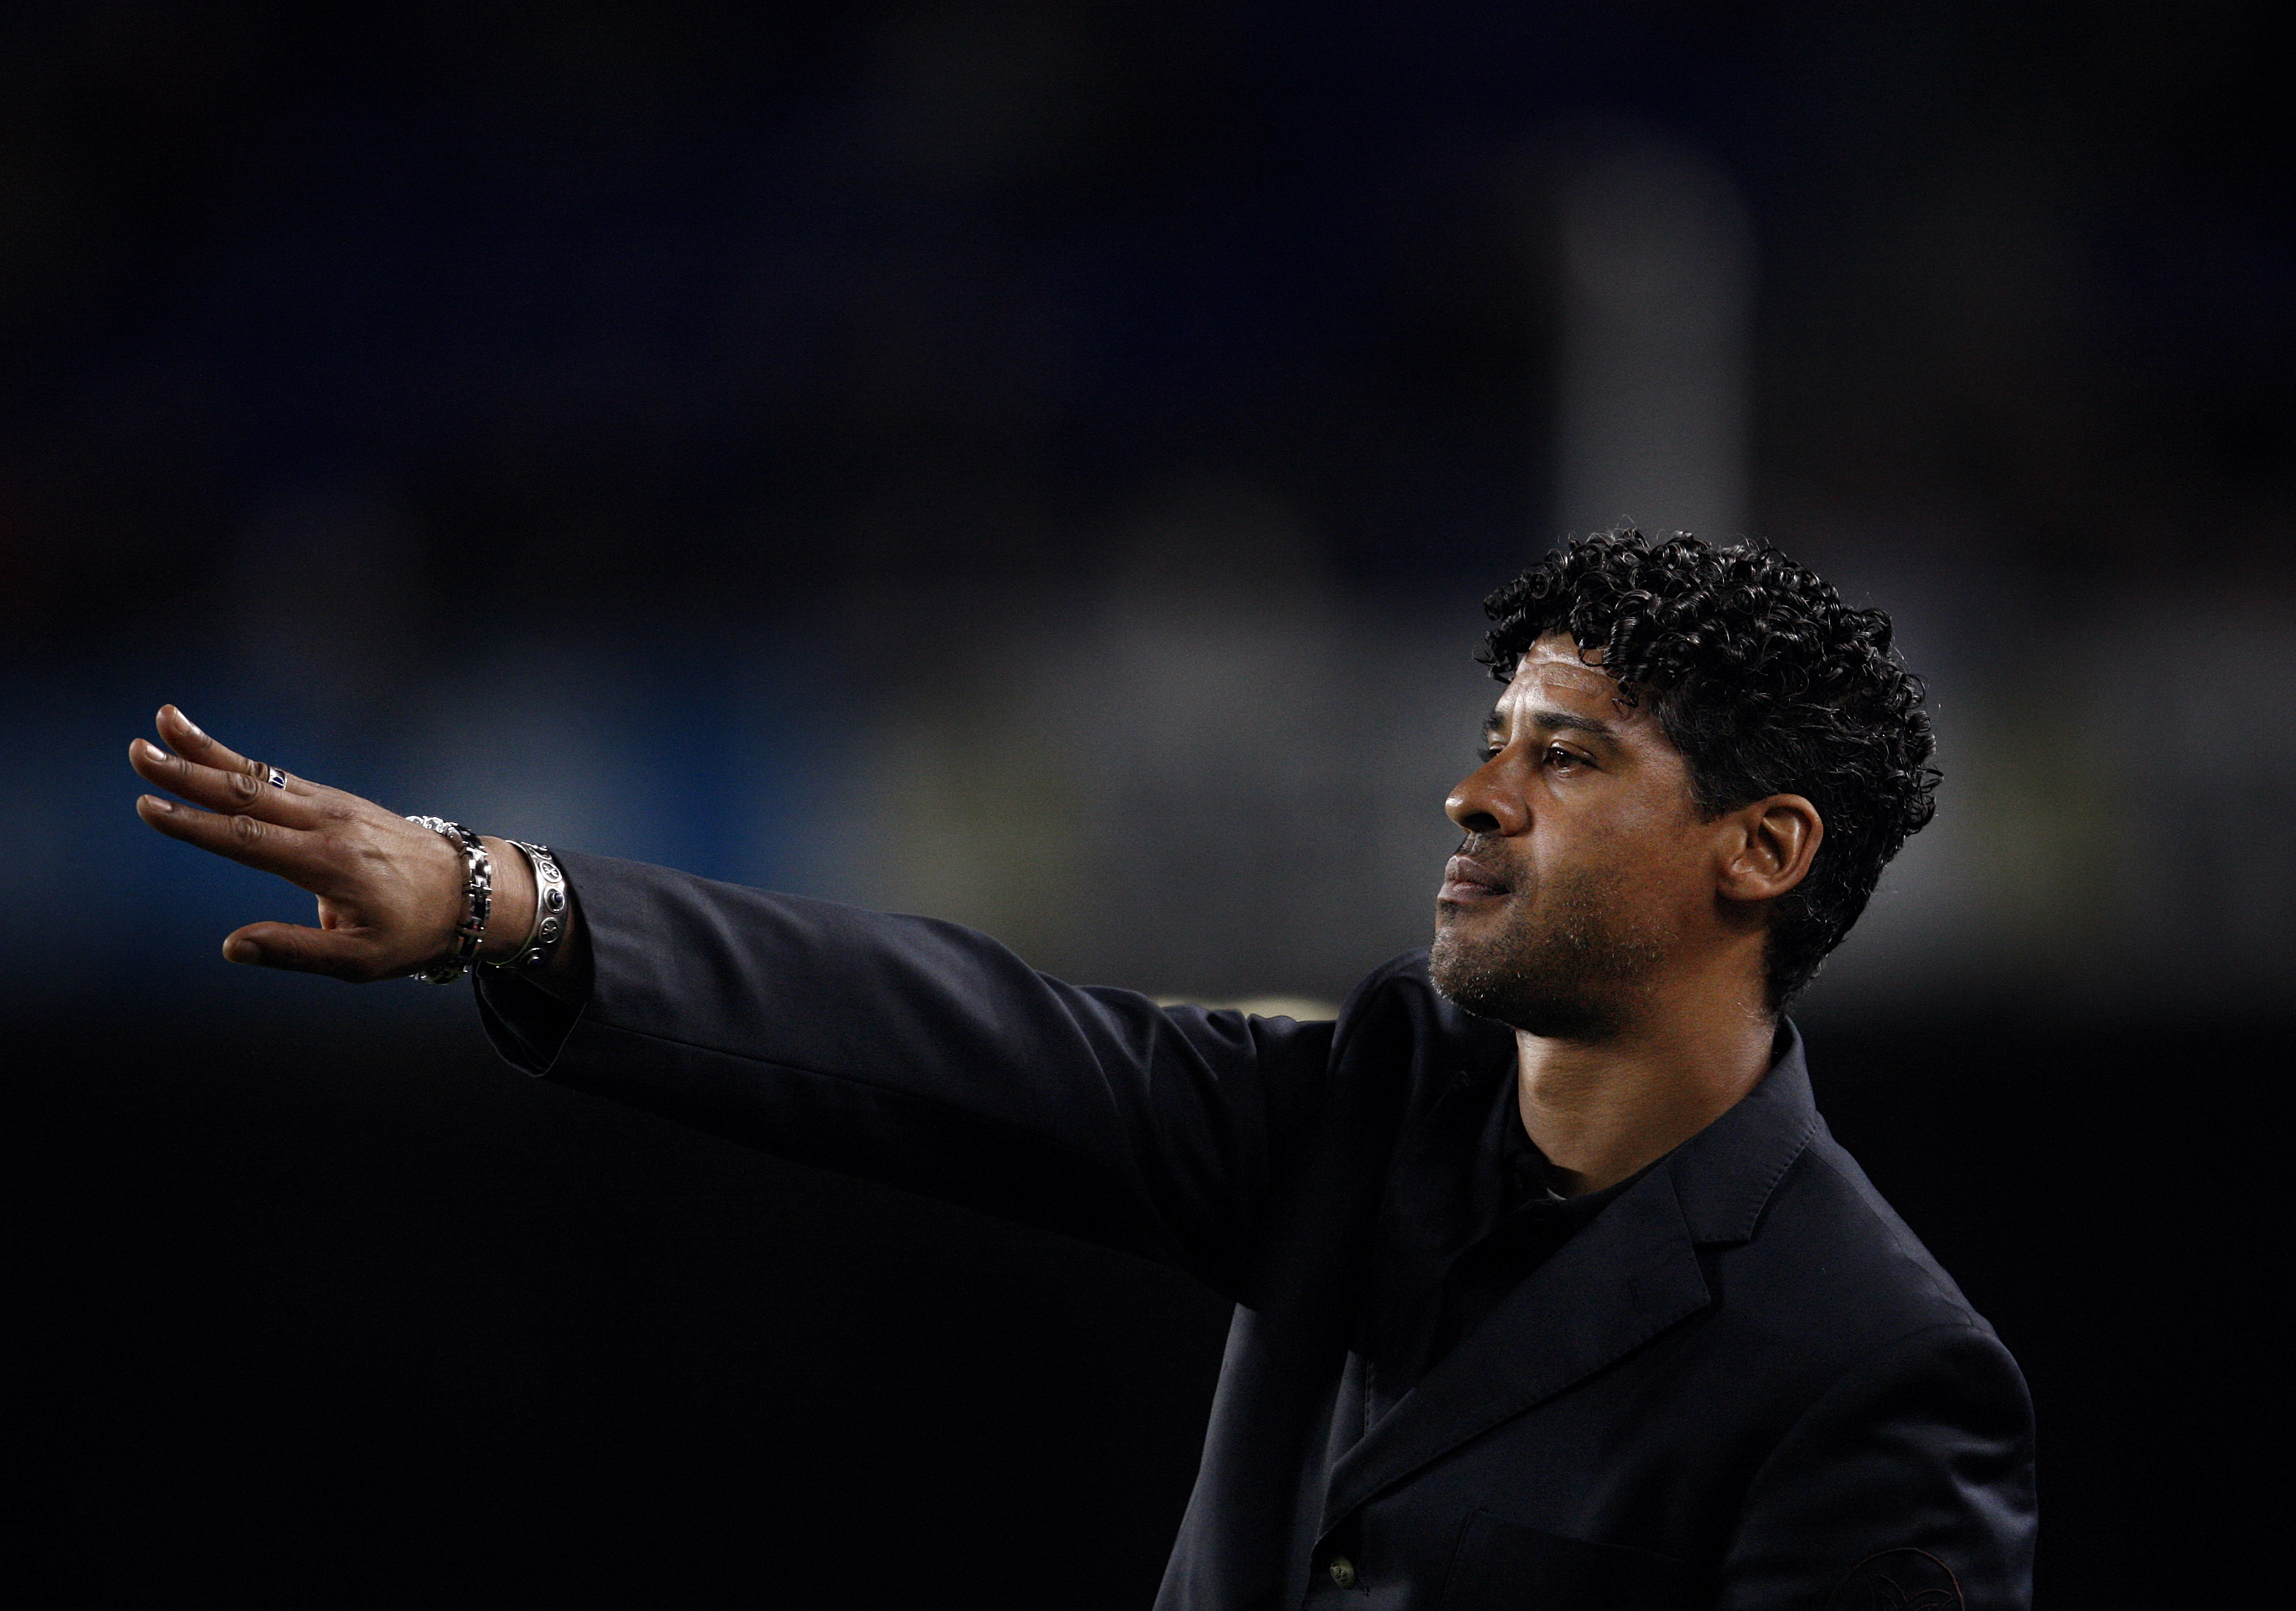 BARCELONA, SPAIN - MAY 11:  Coach Frank Rijkaard of Barcelona instructs his players during his last La Liga home match between Barcelona and Mallorca at the Camp Nou Stadium on May 11, 2008 in Barcelona, Spain. Rijkaard, who willl be replaced as head coac